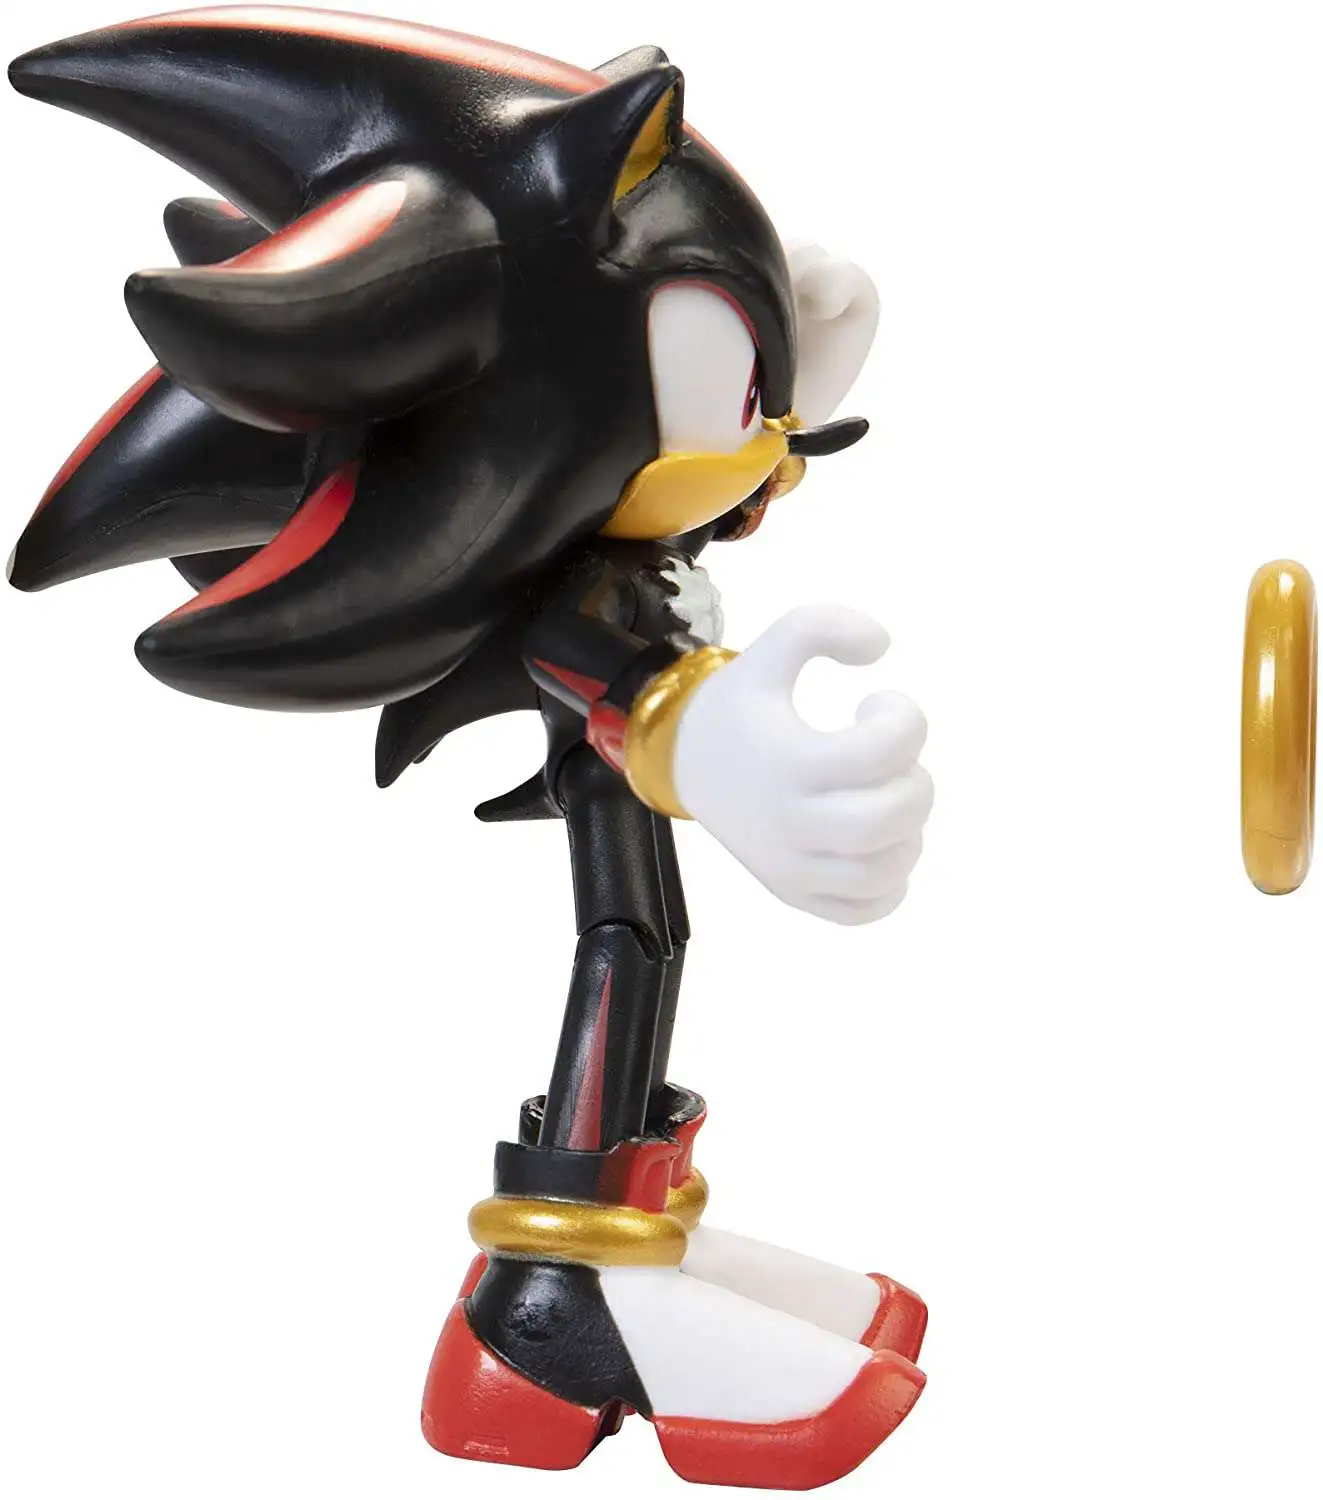 Sonic the Hedgehog 4 inch Action Figure - Modern Tails with Ring